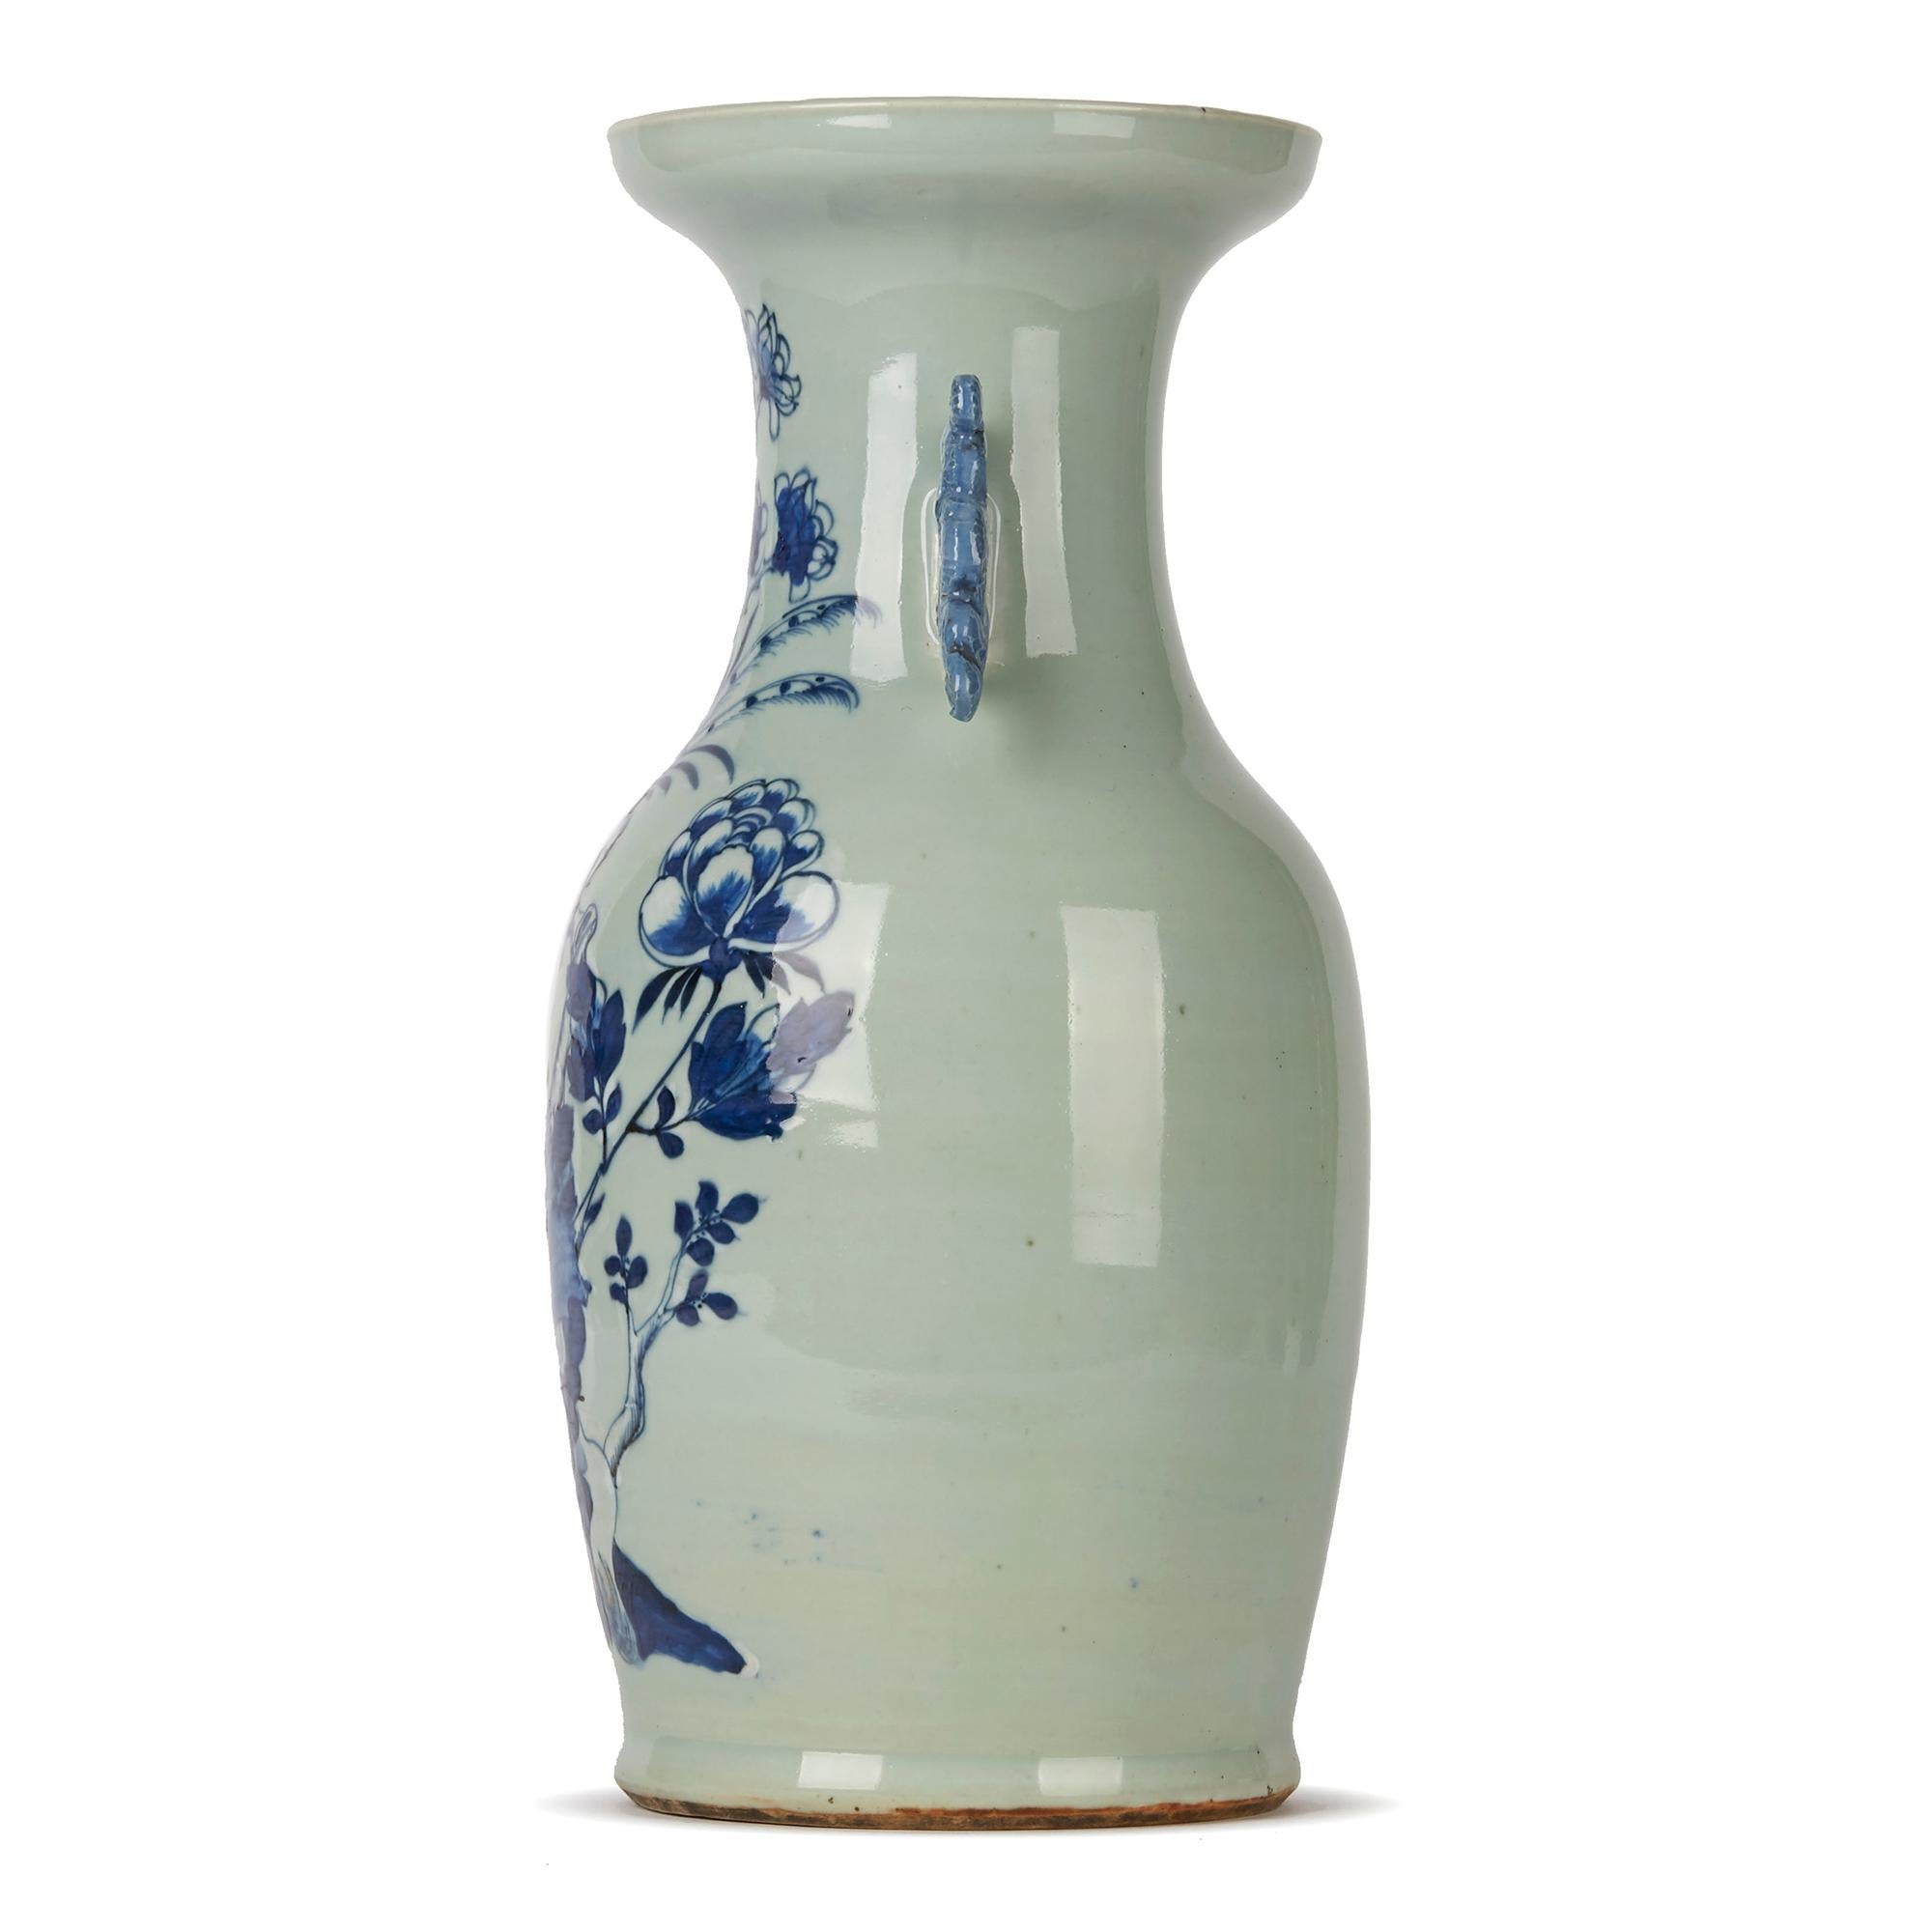 A stunning and large antique Chinese Qing twin handled porcelain vase decorated in blue and white with a bird perched on a branch amidst various flowering shrubs the scene painted against a celadon ground. The bulbous shaped vase has stylised dragon